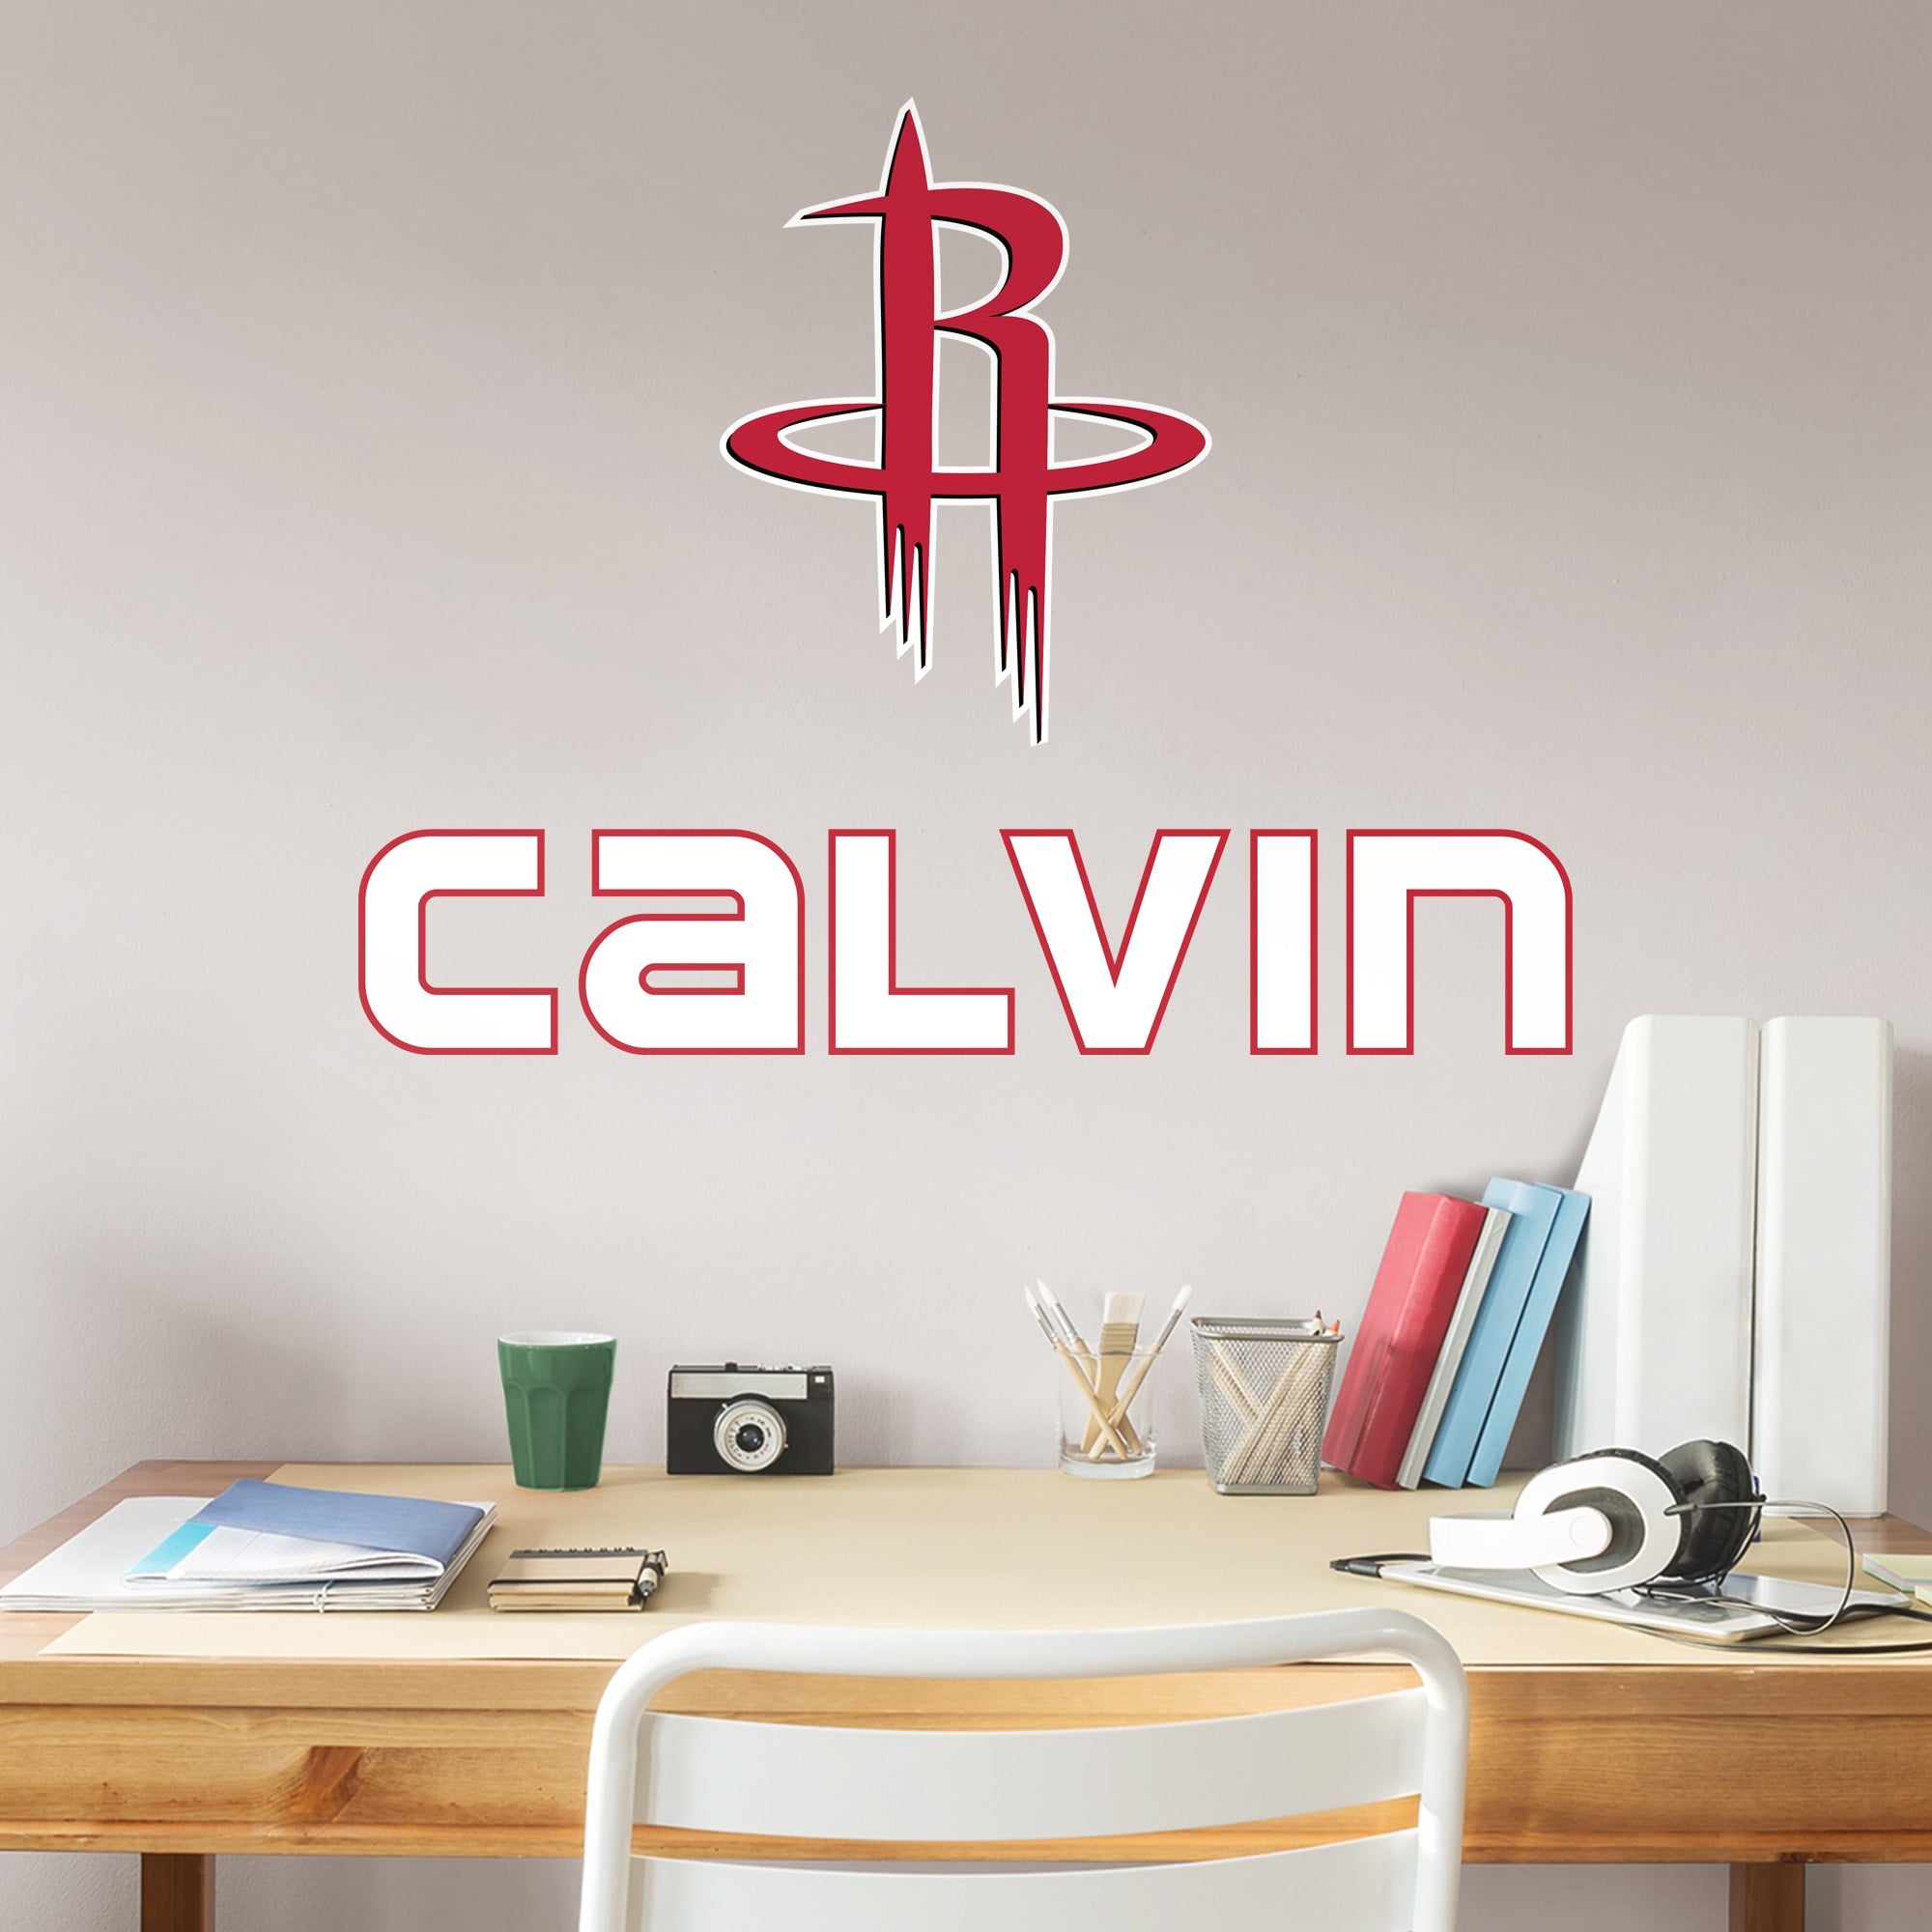 Houston Rockets: Stacked Personalized Name - Officially Licensed NBA Transfer Decal in White (17"W x 23"H) by Fathead | Vinyl